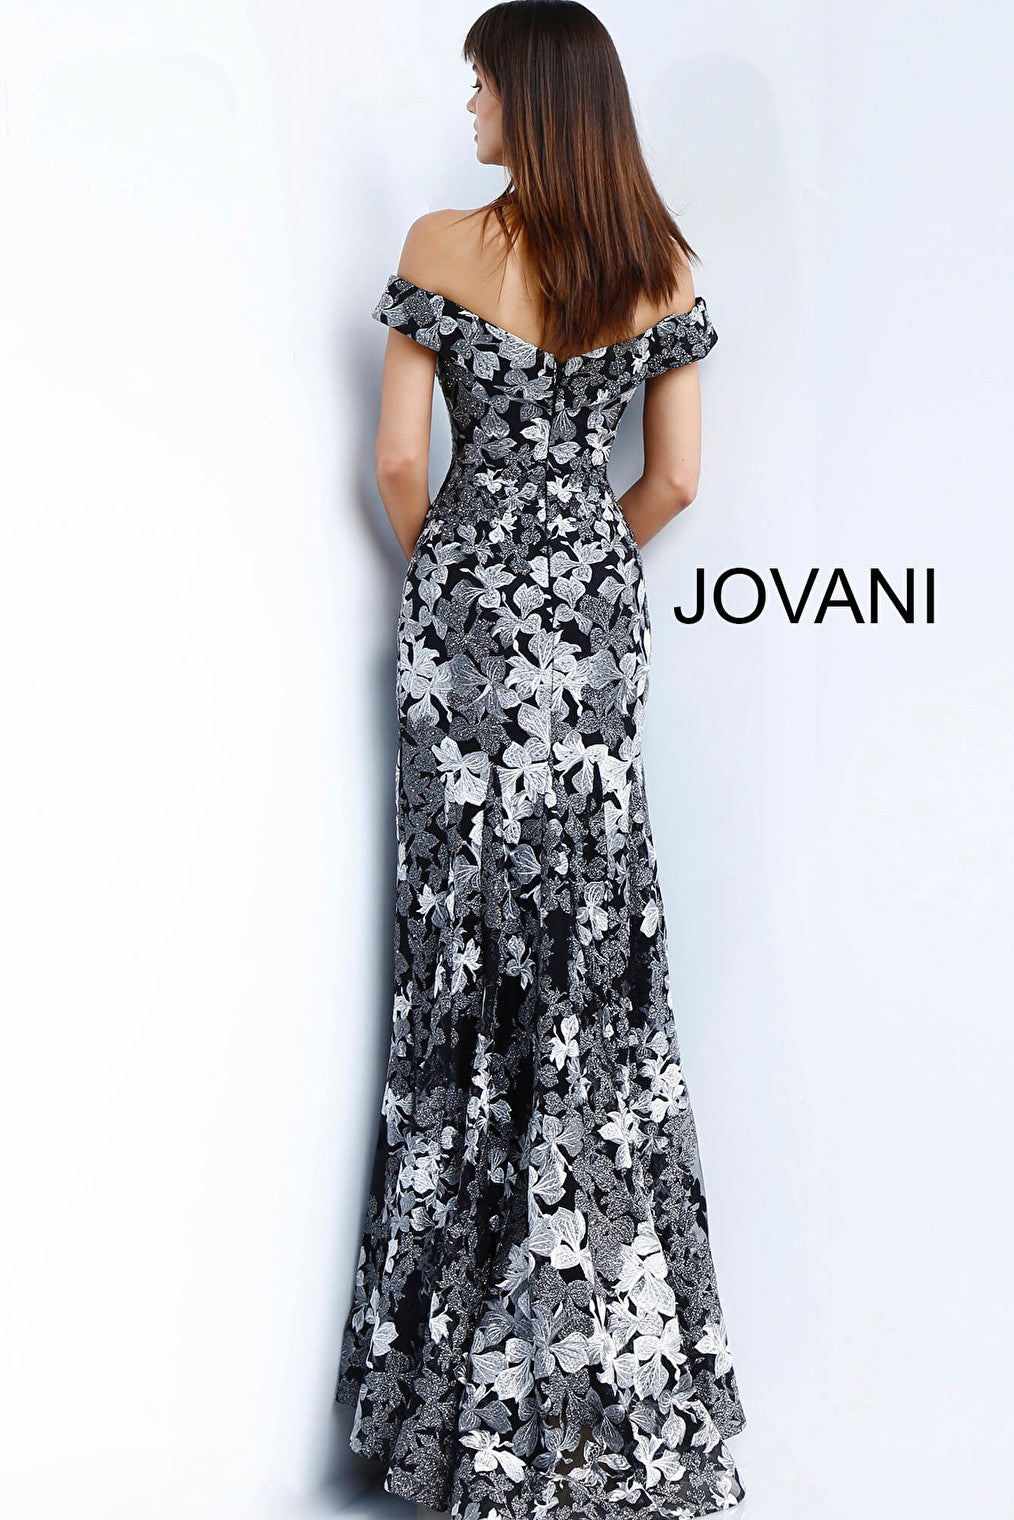 Jovani black and grey floral embroidered evening dress 61380